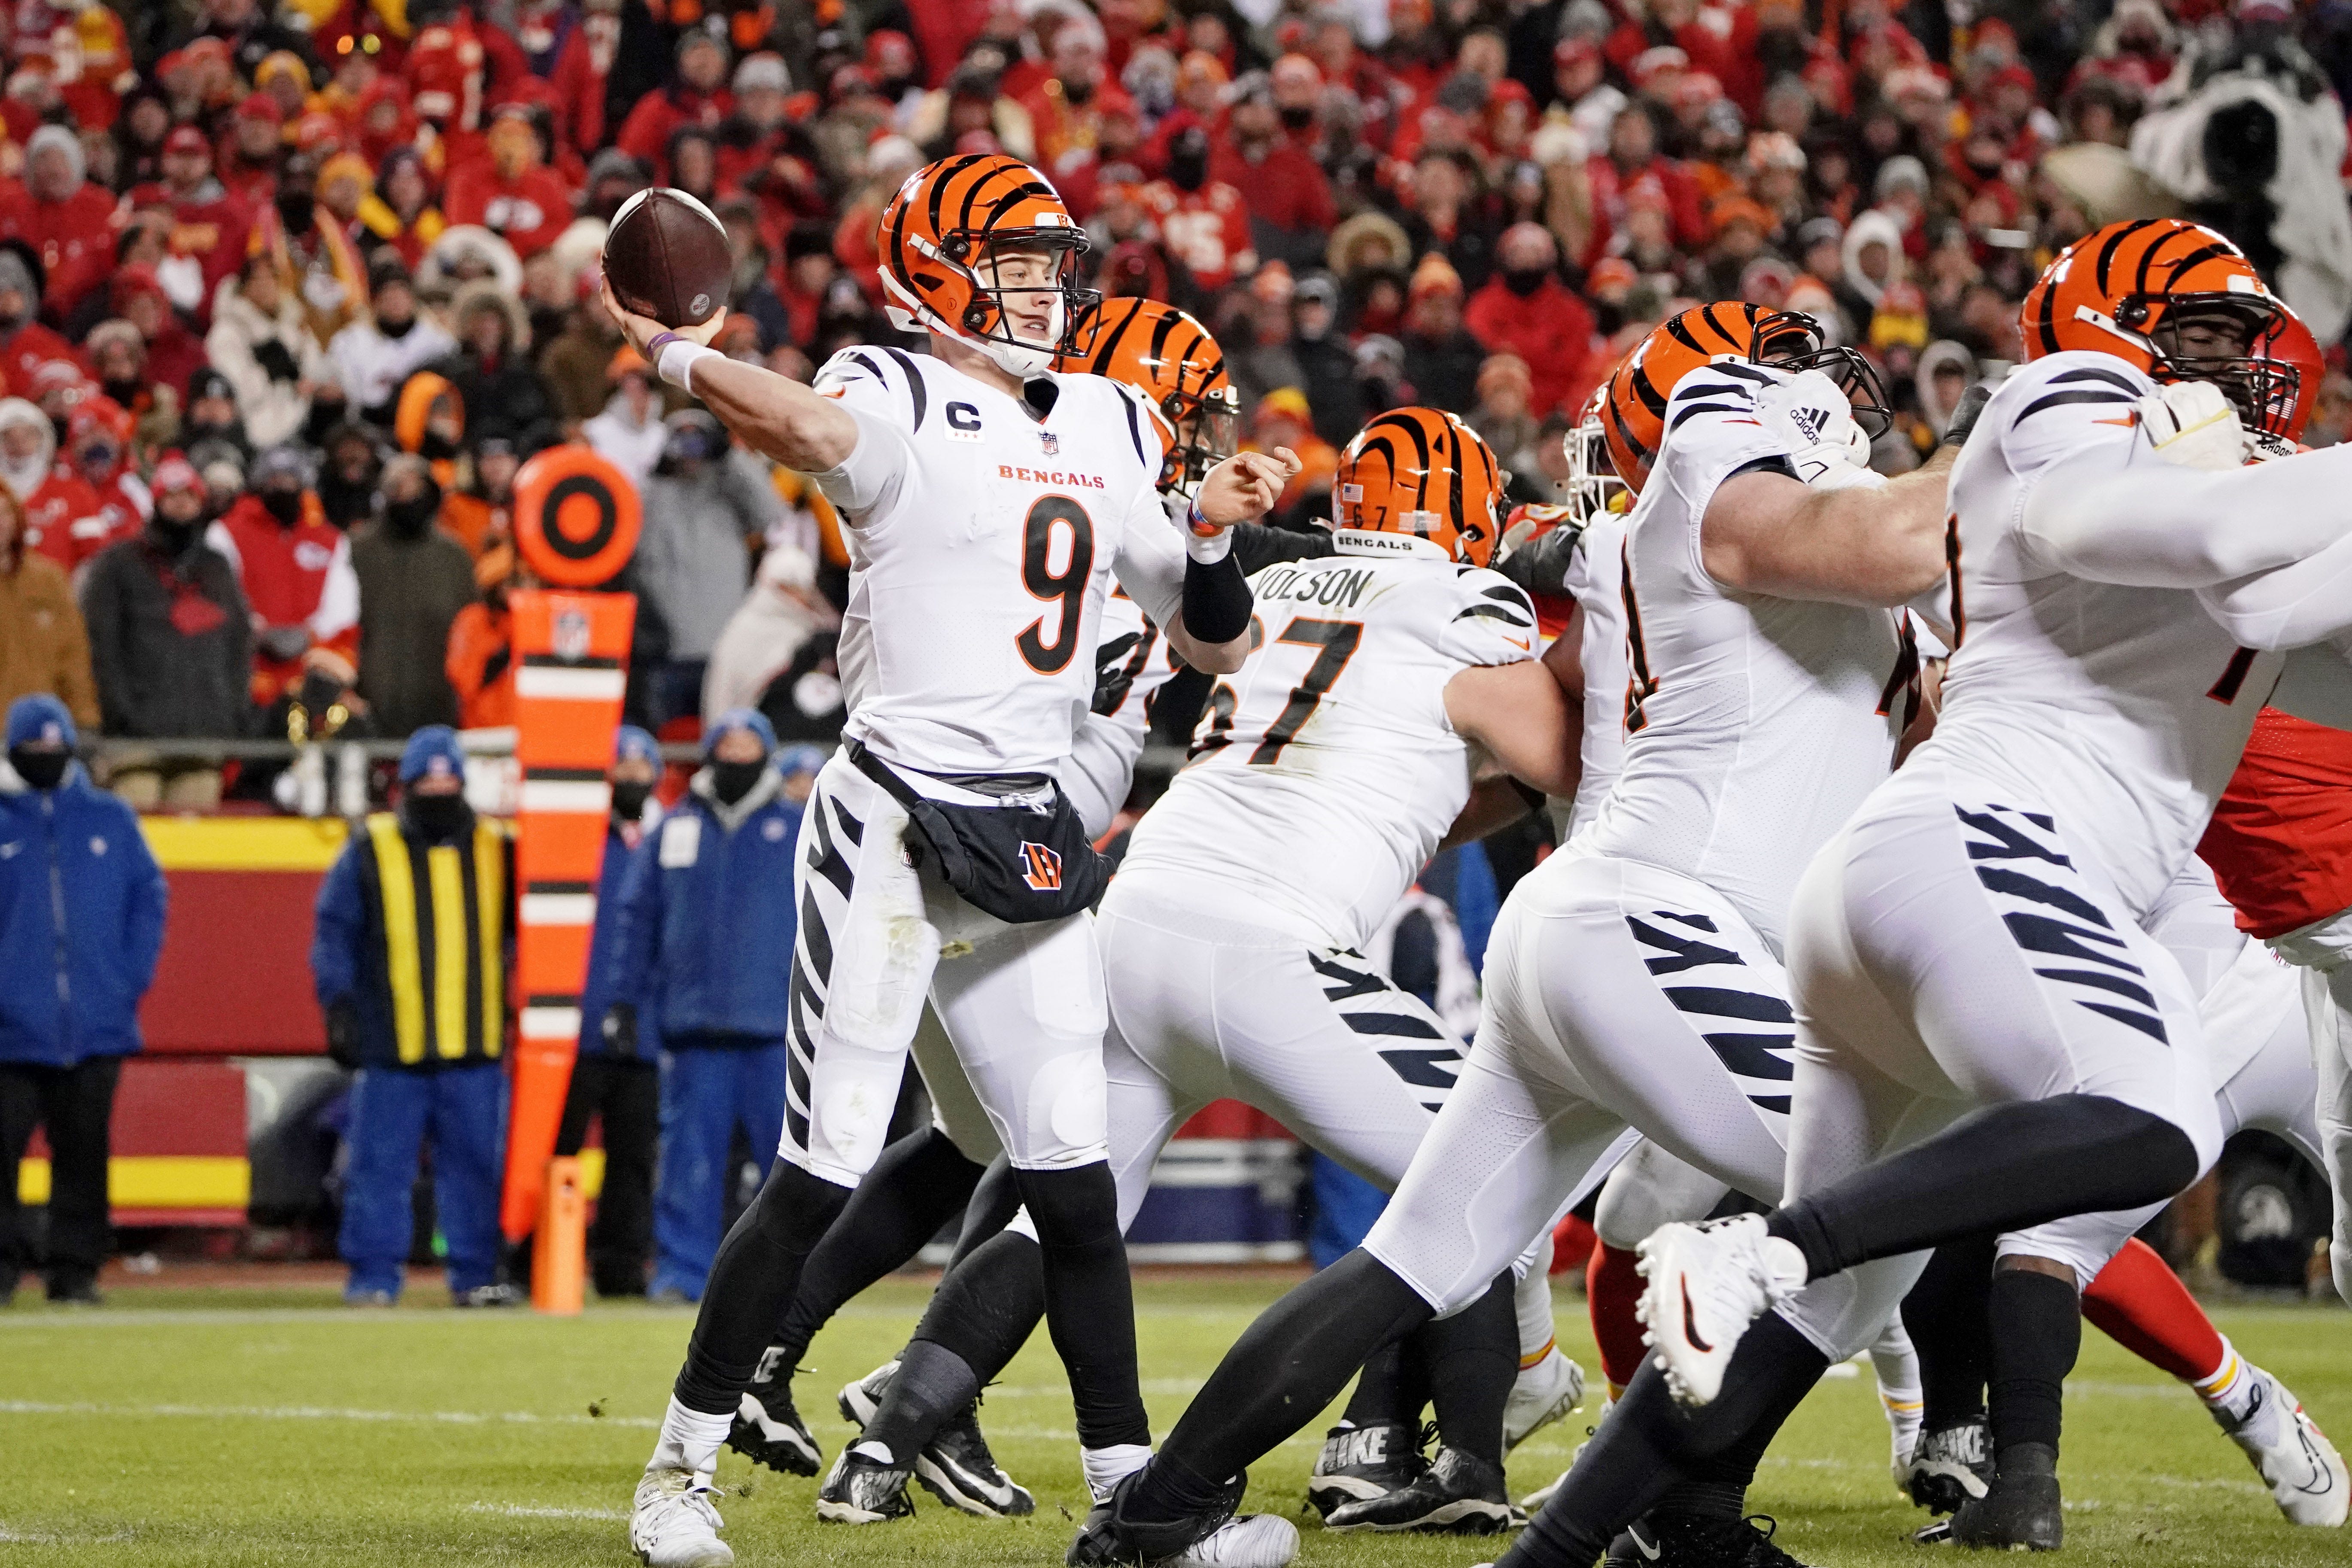 Chiefs vs. Bengals score, analysis: Nail-biter in AFC title game with 20-20 score in fourth quarter